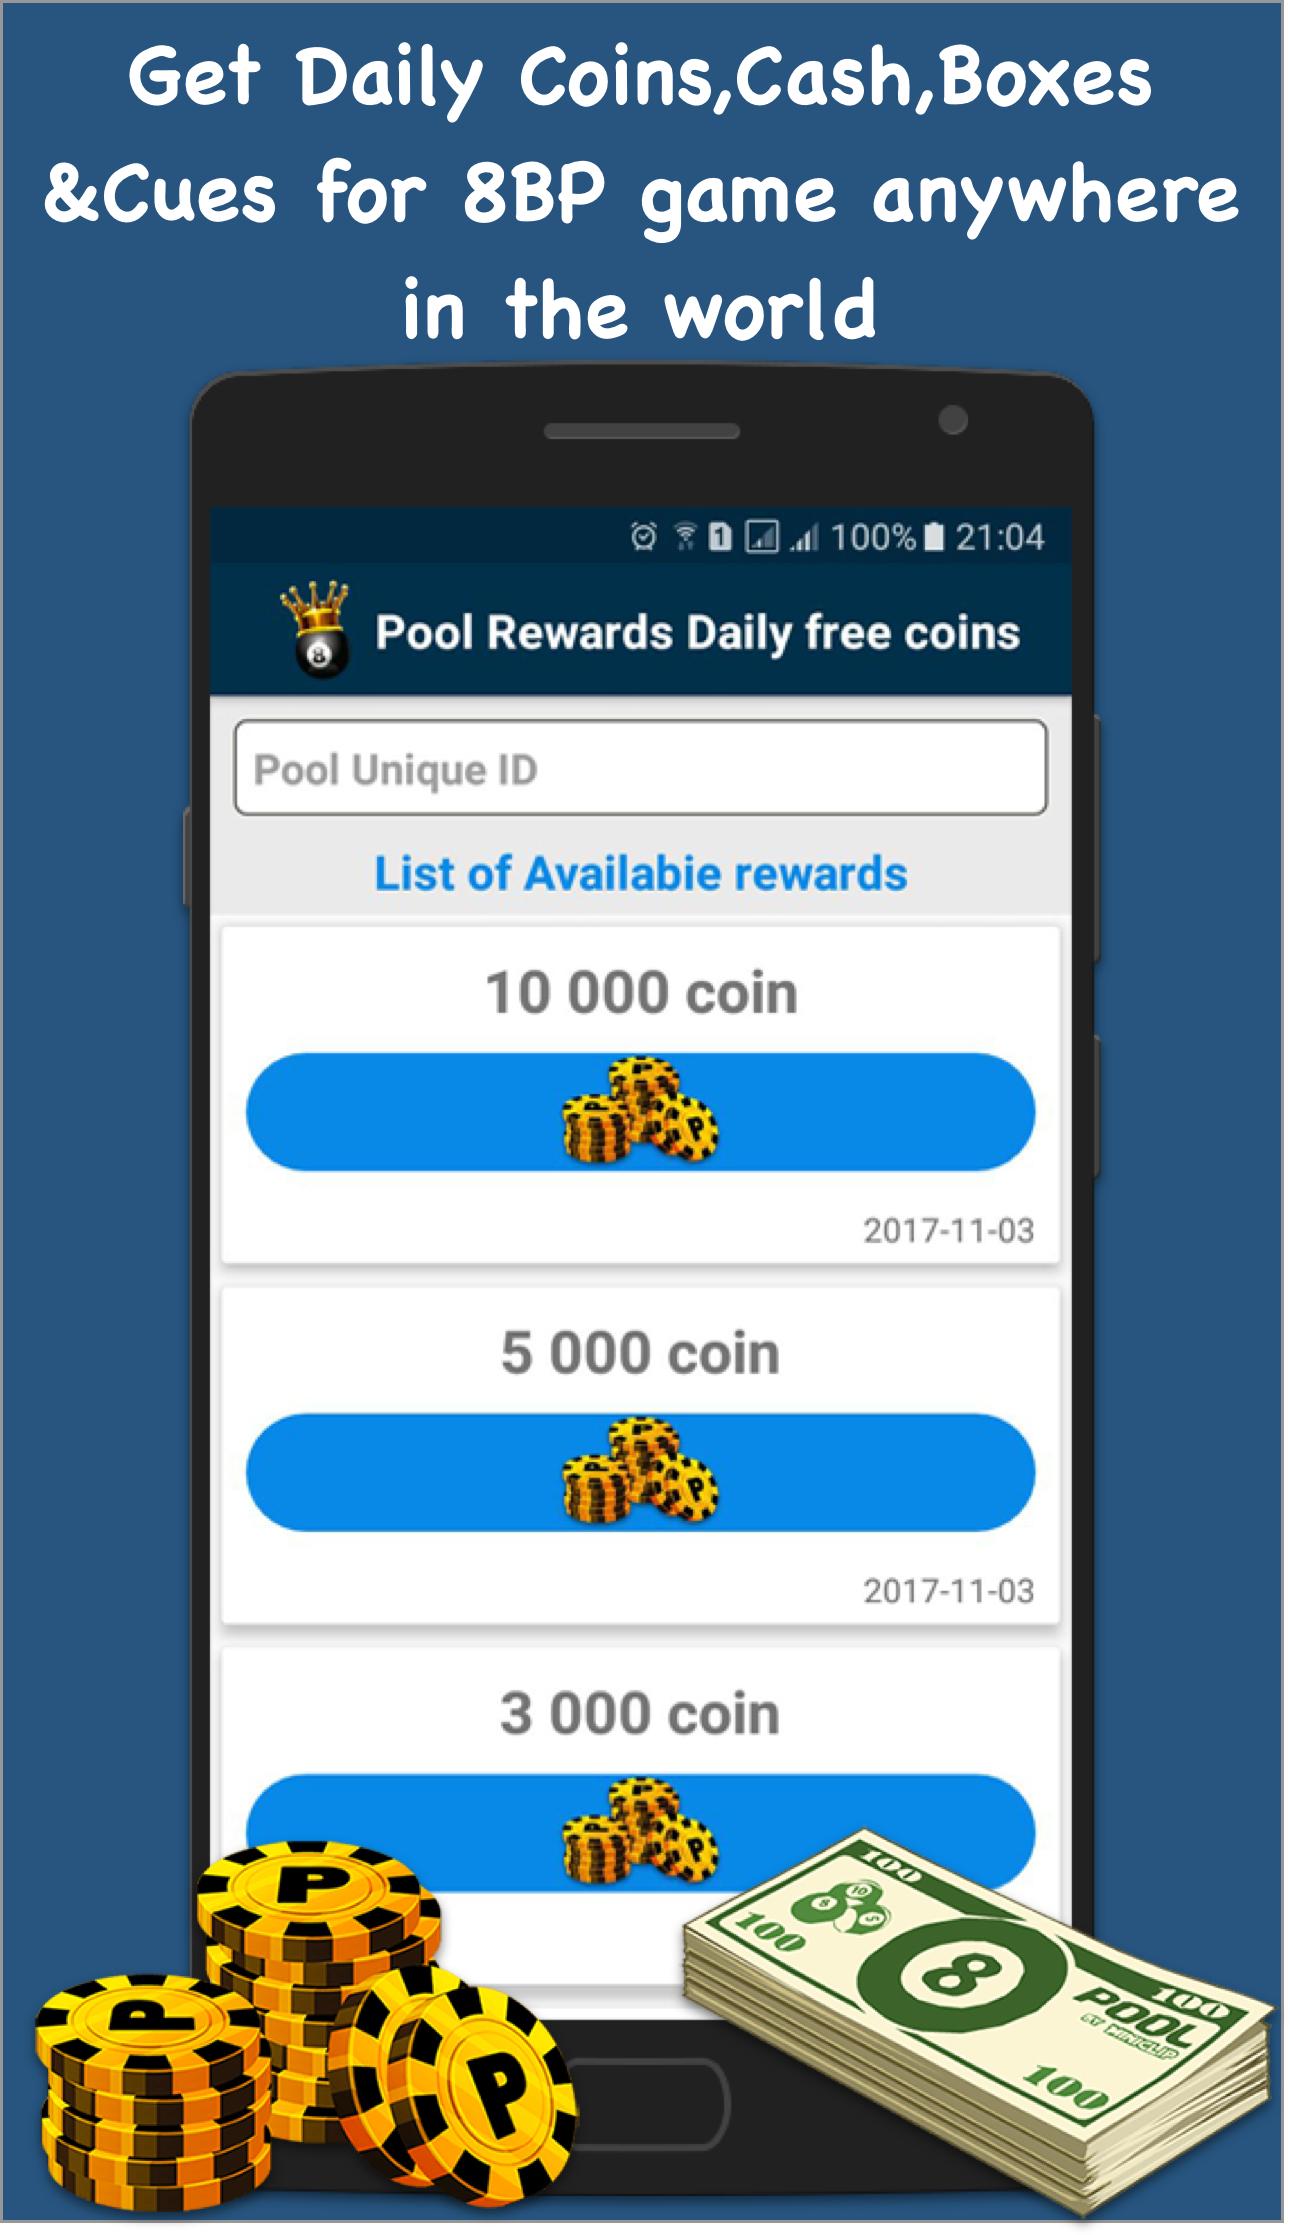 Pool Rewards Daily free Coins for Android - APK Download - 